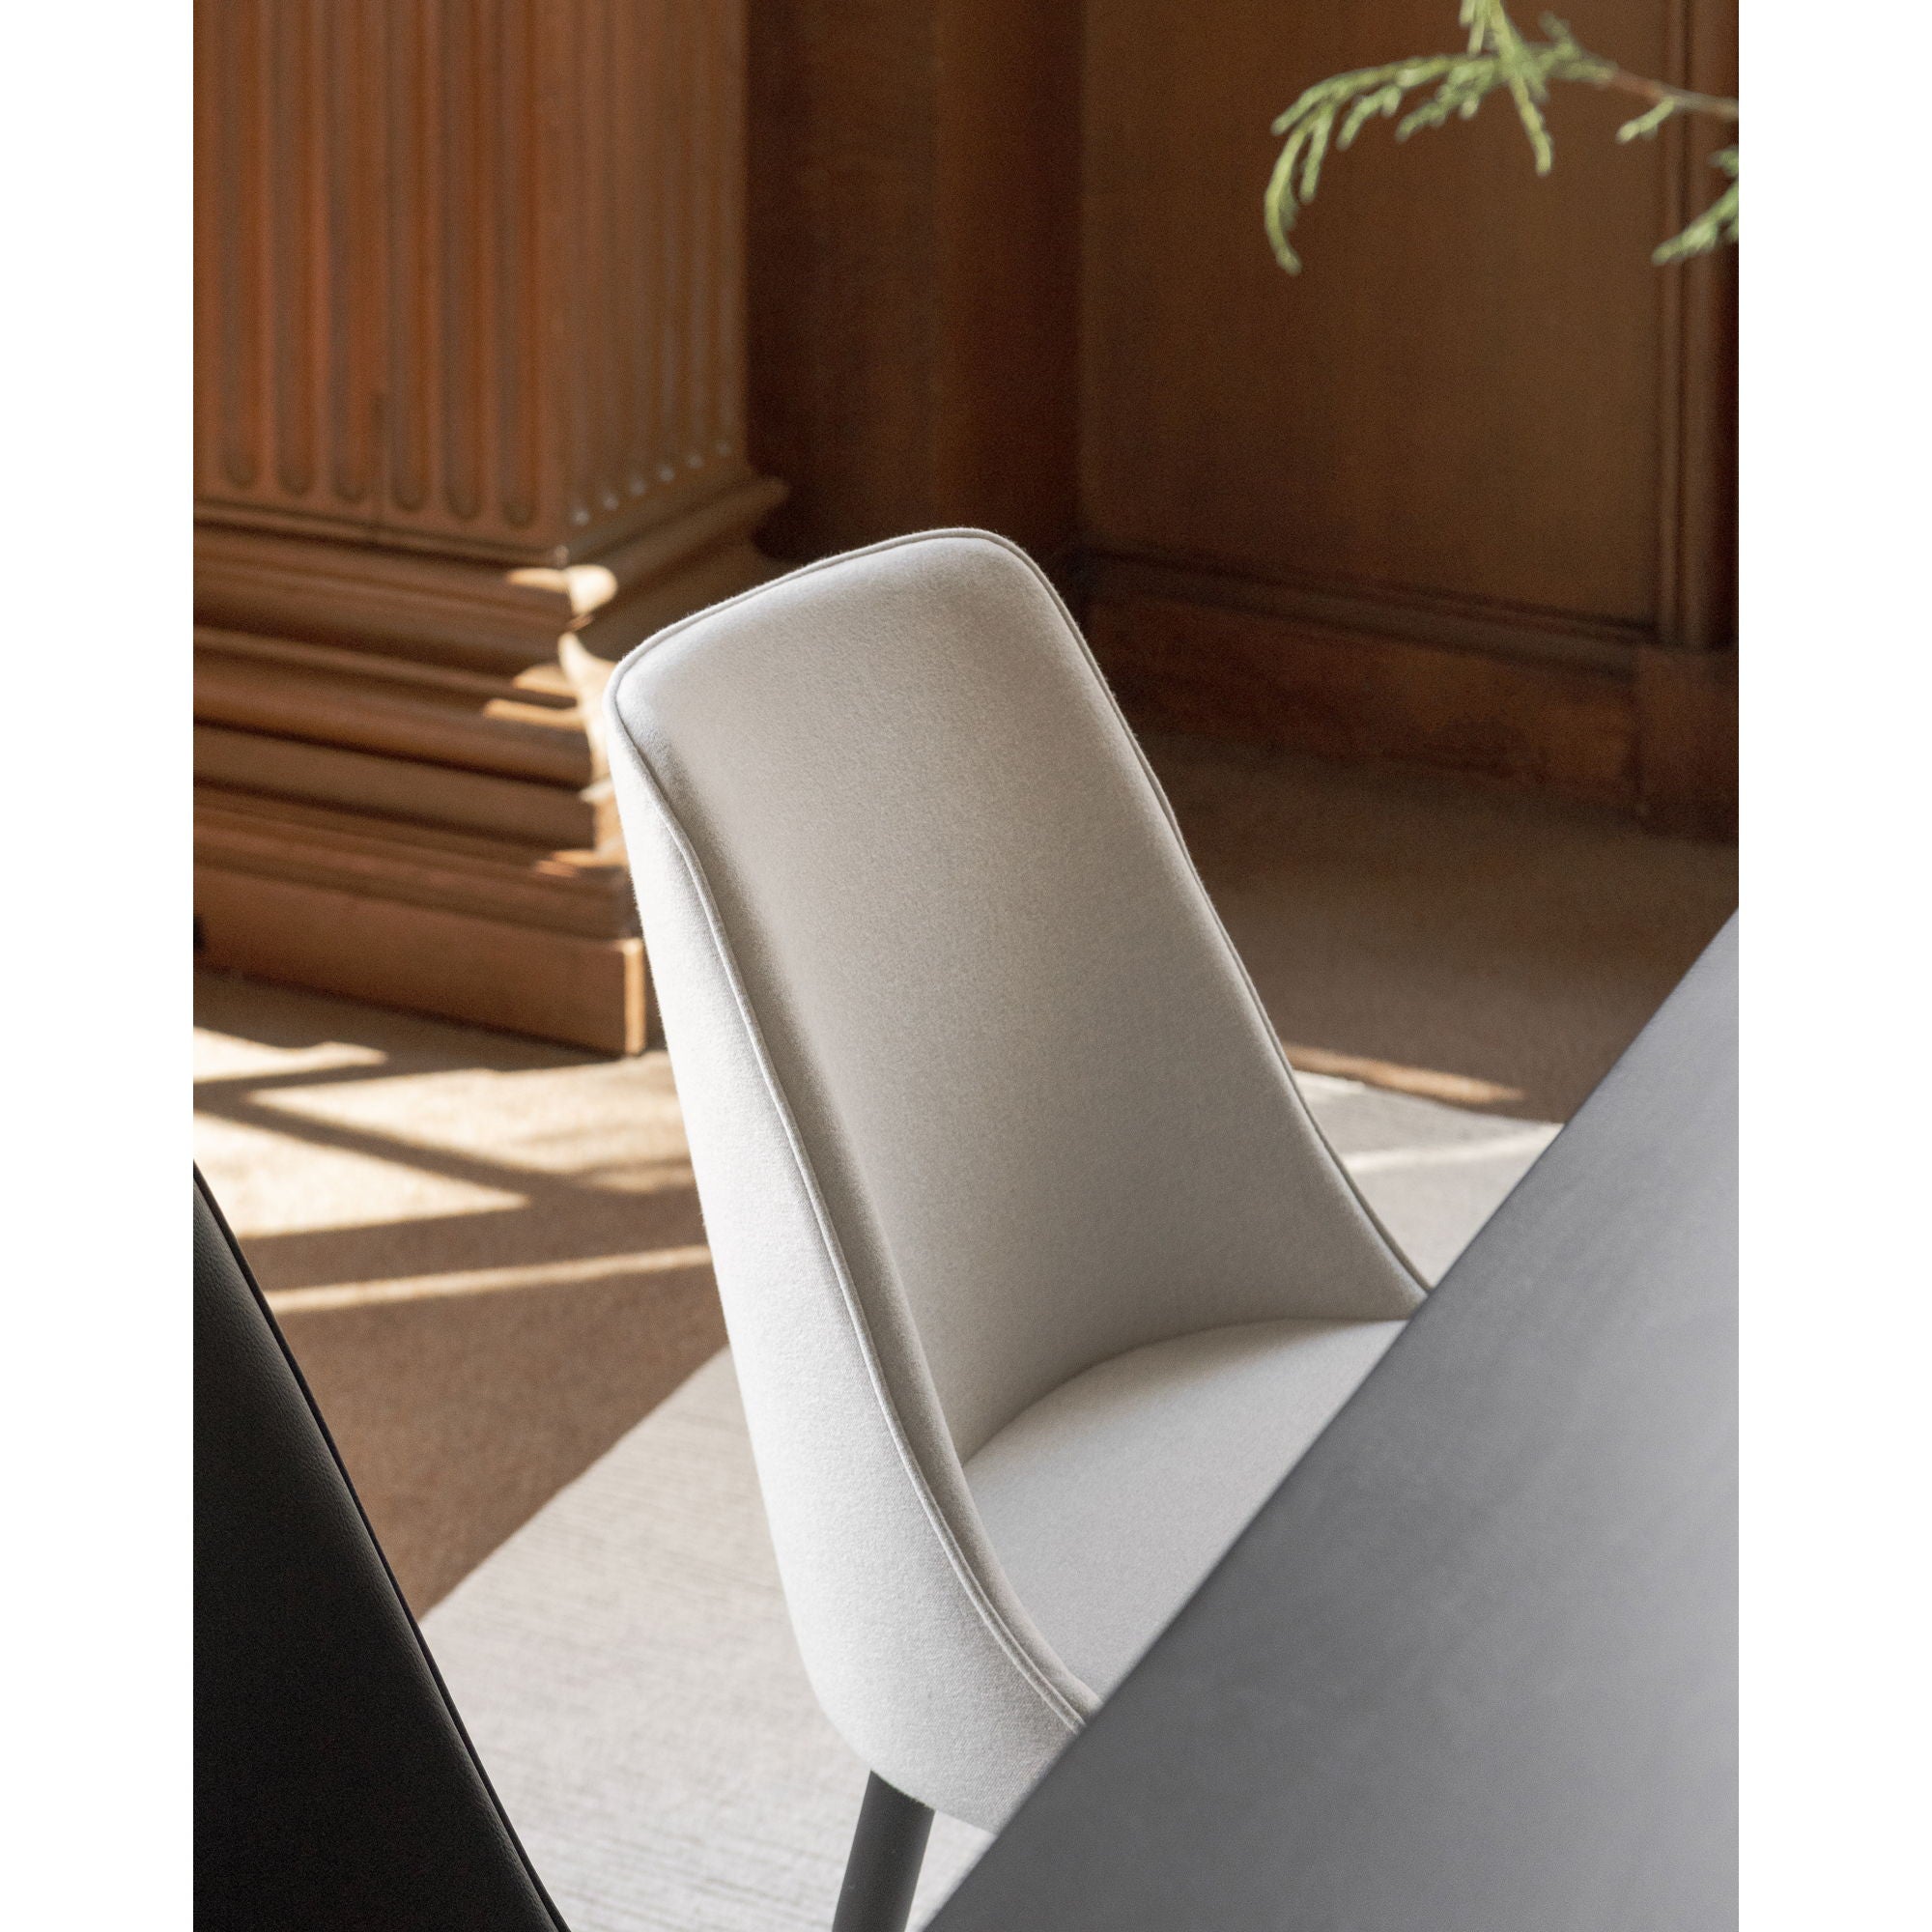 Lula - Dining Chair - White